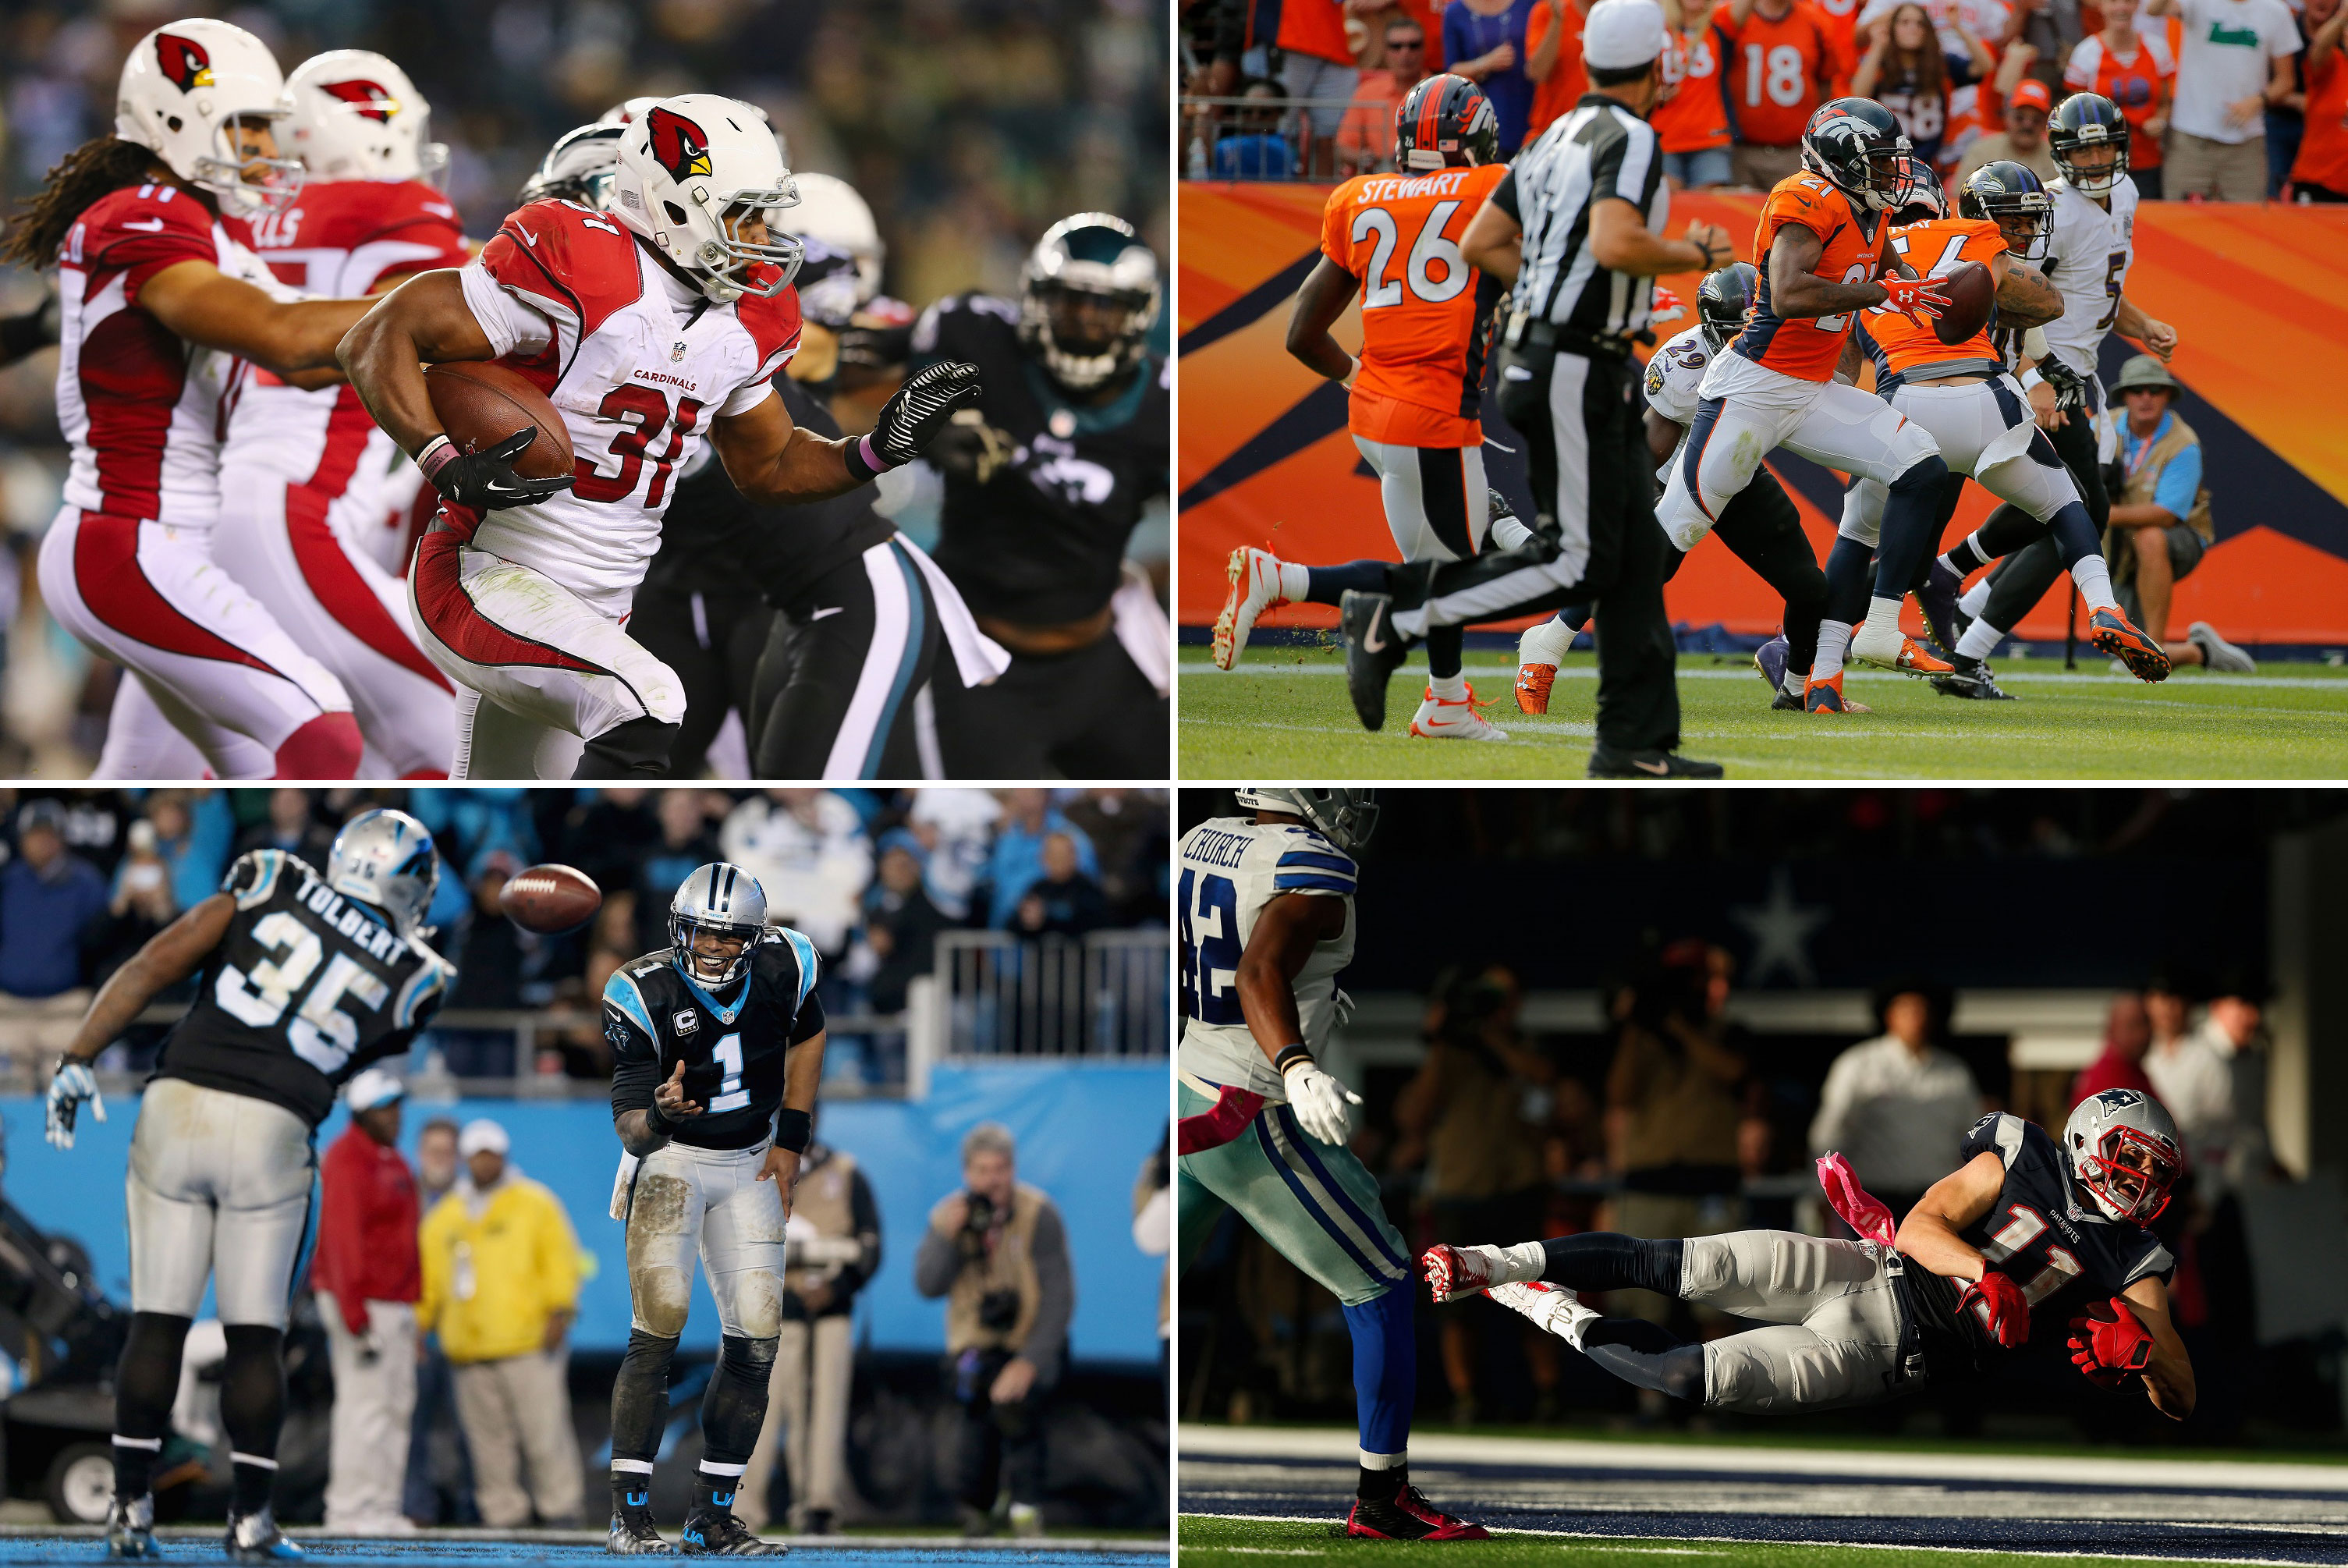 NFL Playoff Preview: Why any team could win